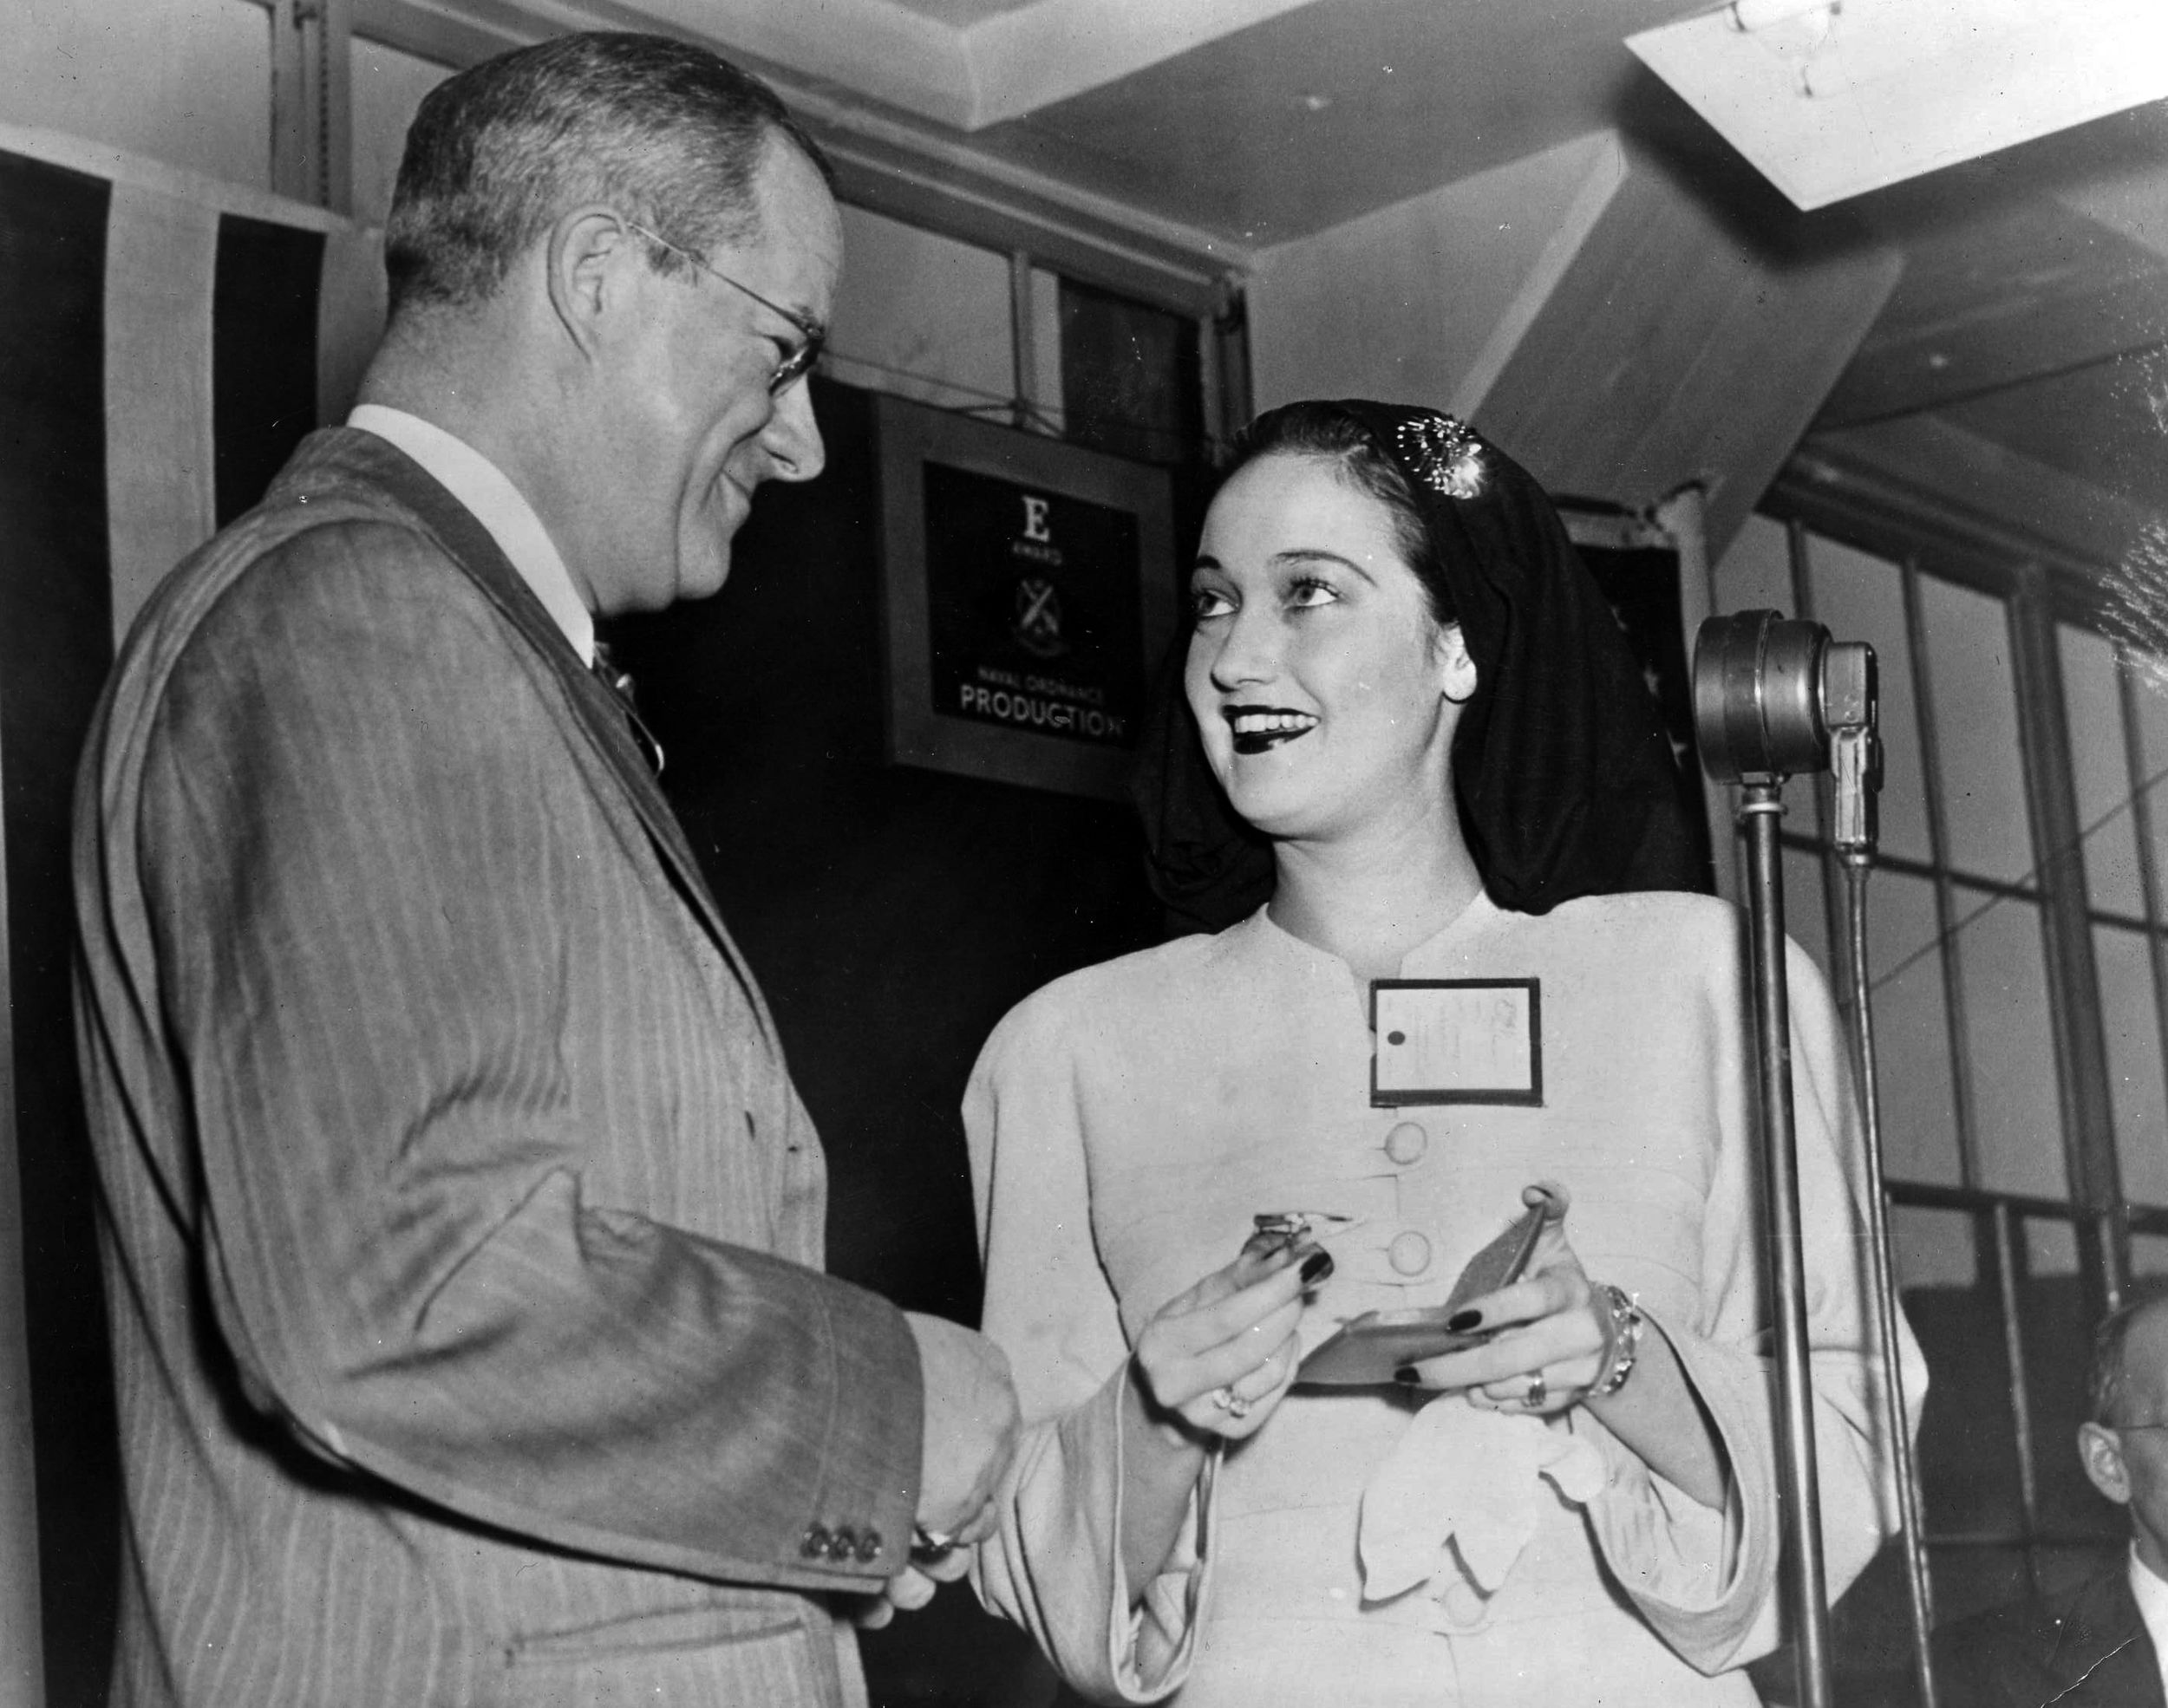 At the Bausch & Lomb plant in Rochester, New York, actress Dorothy Lamour makes an appearance to kick off a week-long campaign to sell war bonds. Bausch & Lomb Vice President Carl S. Hallauer presents the actress with a memento of her visit.